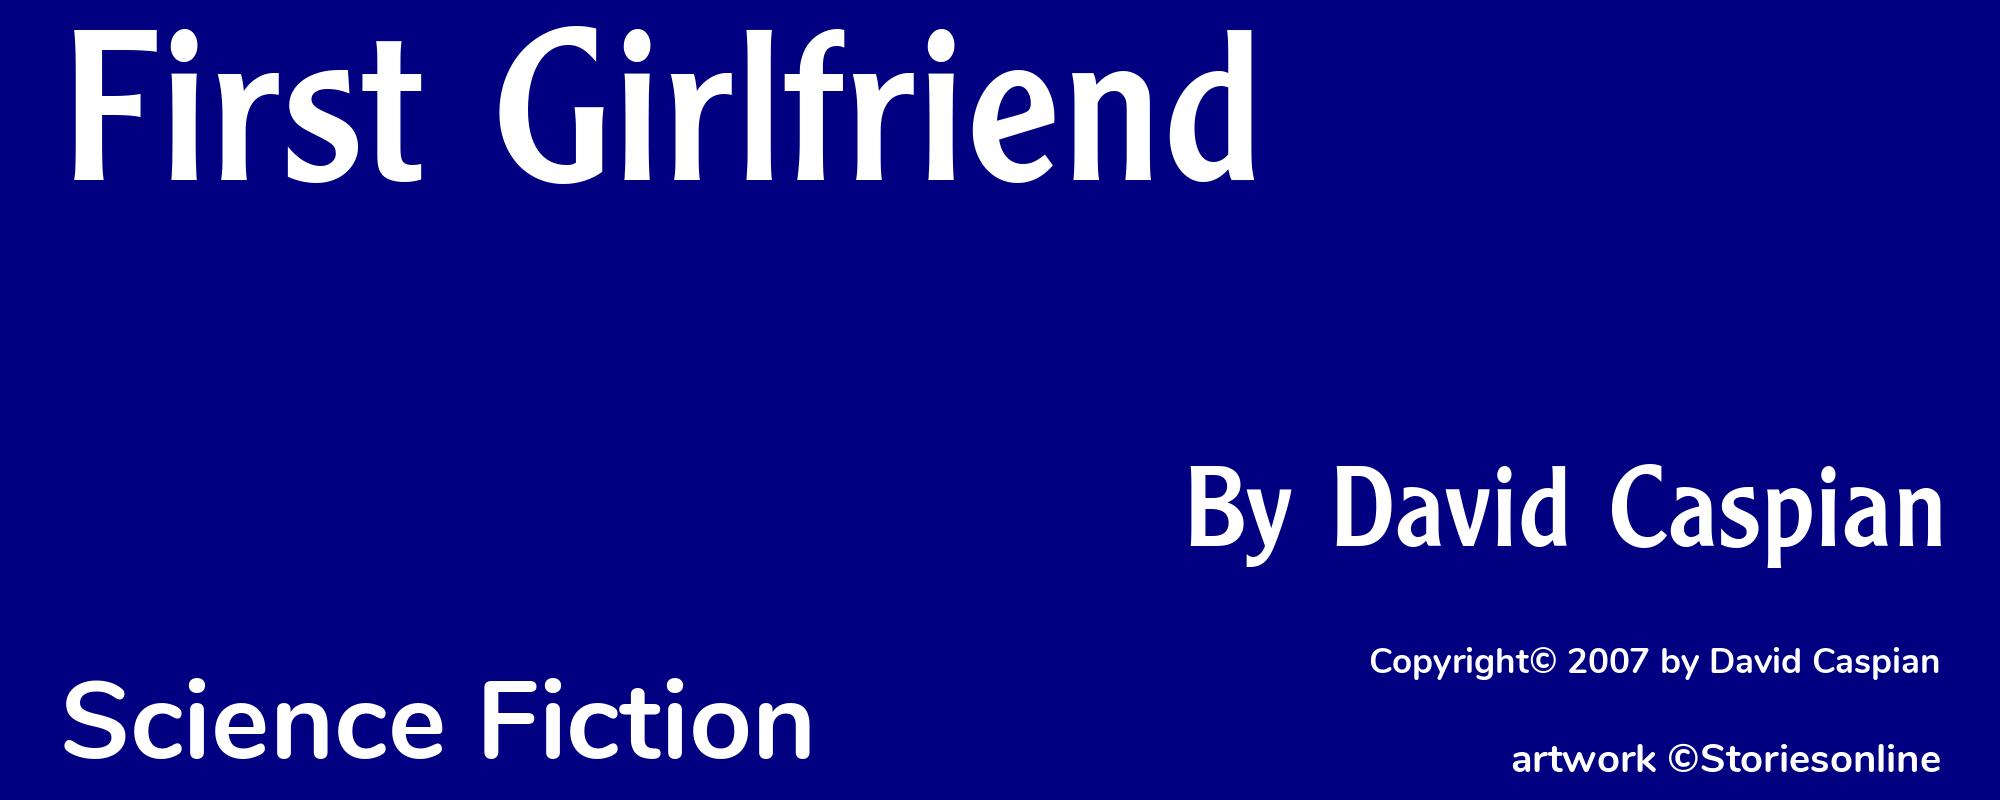 First Girlfriend - Cover